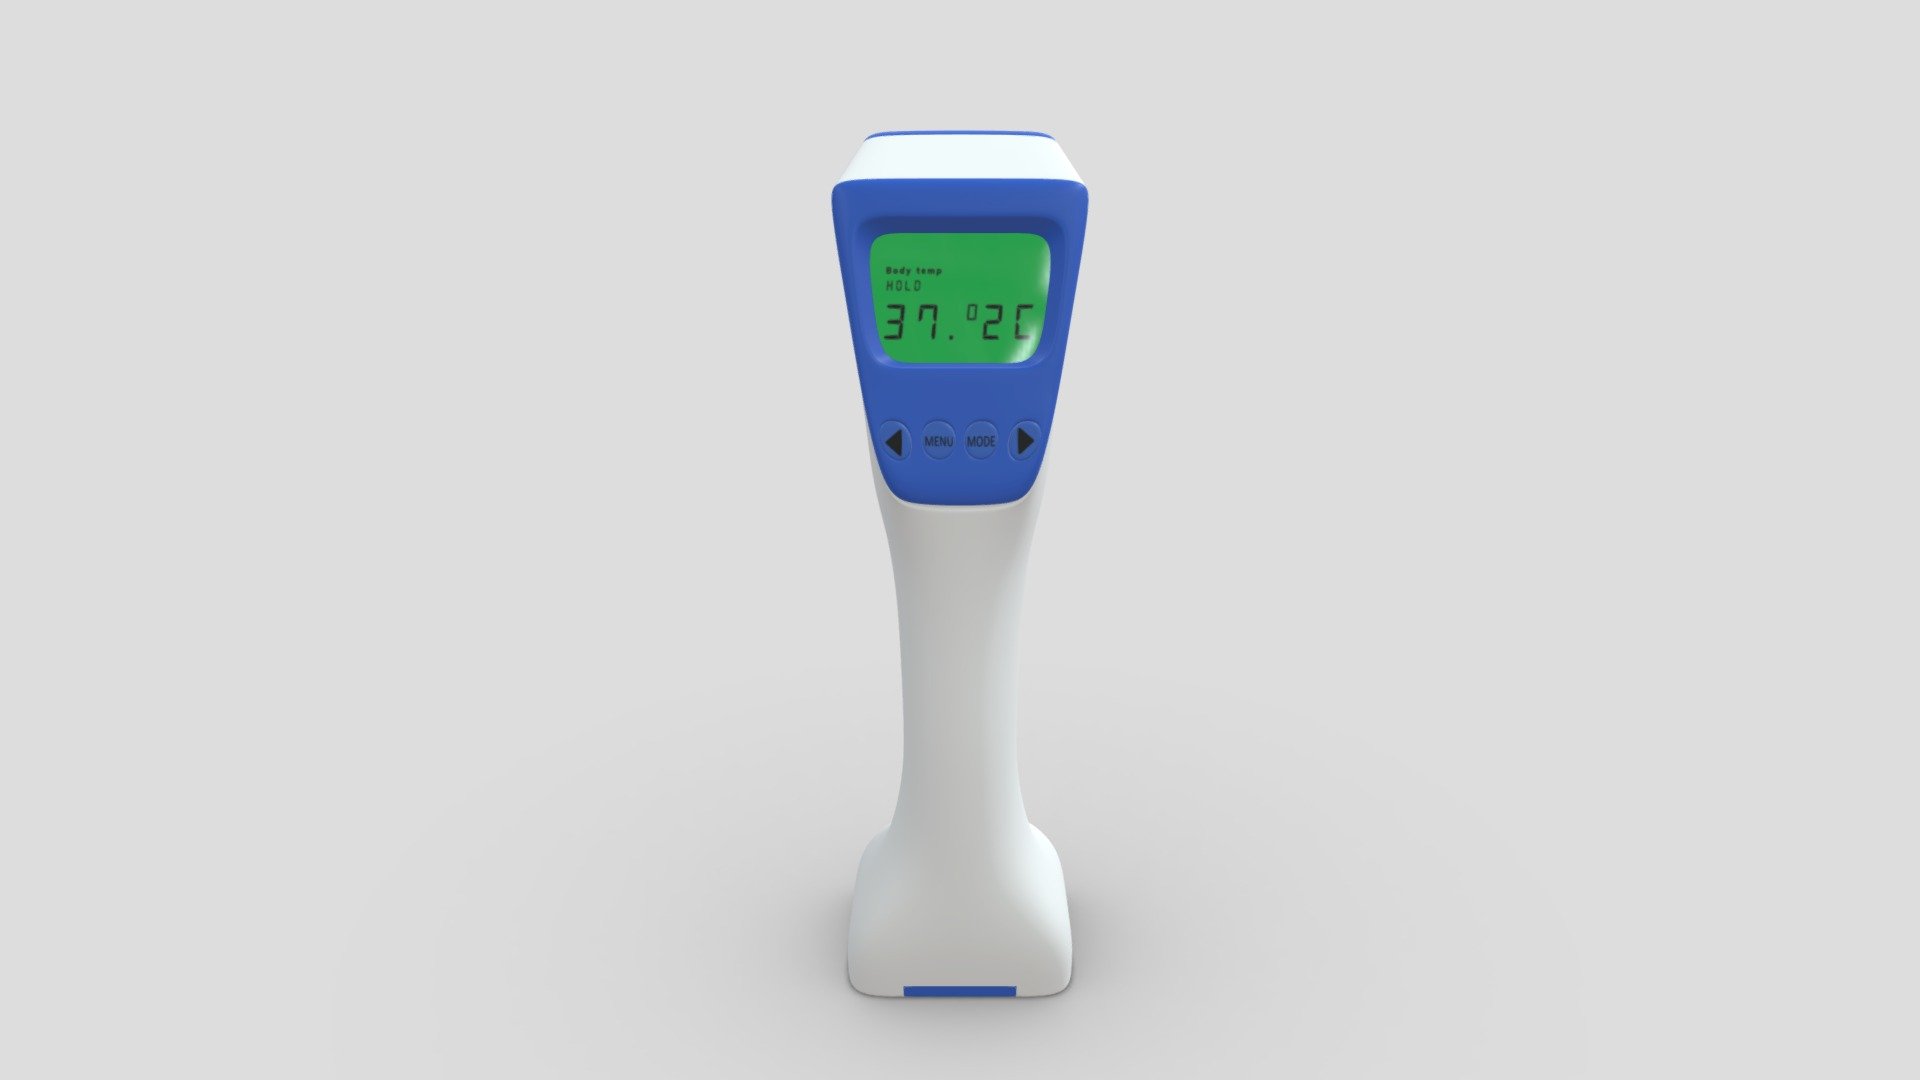 This model is an original design of a generic unbranded infrared thermometer for medical purposes.

Copyright and patent infringement is a big deal so I designed this generic device that can be safely used for any educational purpose to show how an infrared thermometer is used while you'll avoid doing advertising for a specific brand inadvertently. 

So you'll find a lot of 3d models of infrared thermometers that are identical to existing commercial branded devices but this one is unique and has a stylized futuristic design.

This particular version is high poly but I can provide a low poly version if needed 3d model